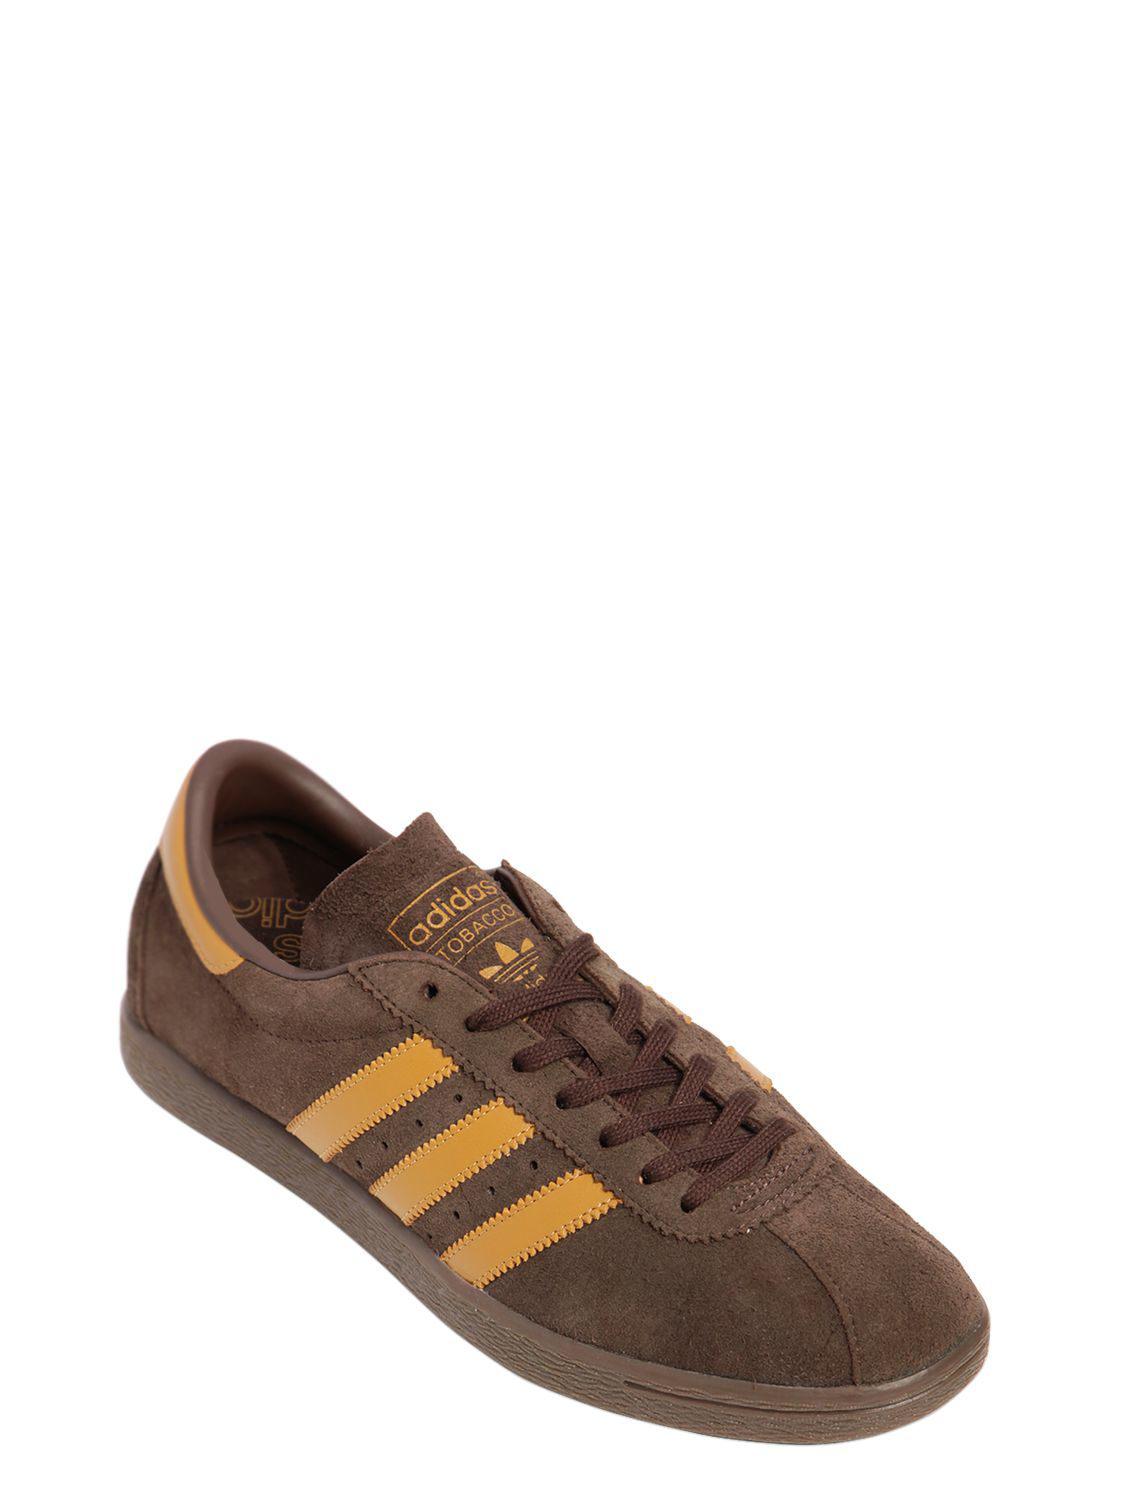 adidas Originals Tobacco Suede & Leather Sneakers in Brown for Men - Lyst